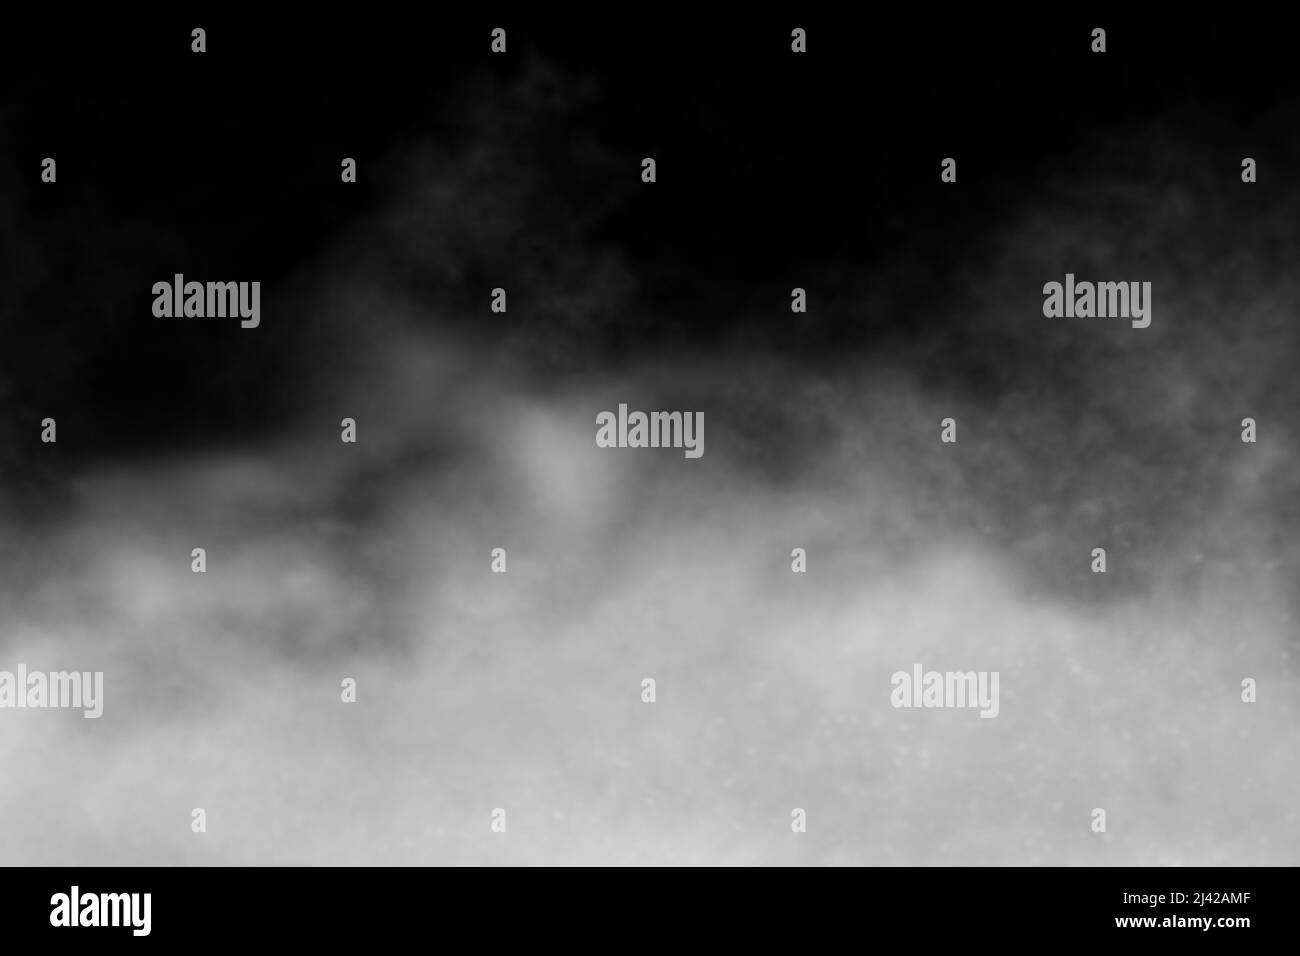 Smoke on black background realistic smoke overlay for different projects design background for promo, trailer, titles, text, opener backdrop Stock Photo